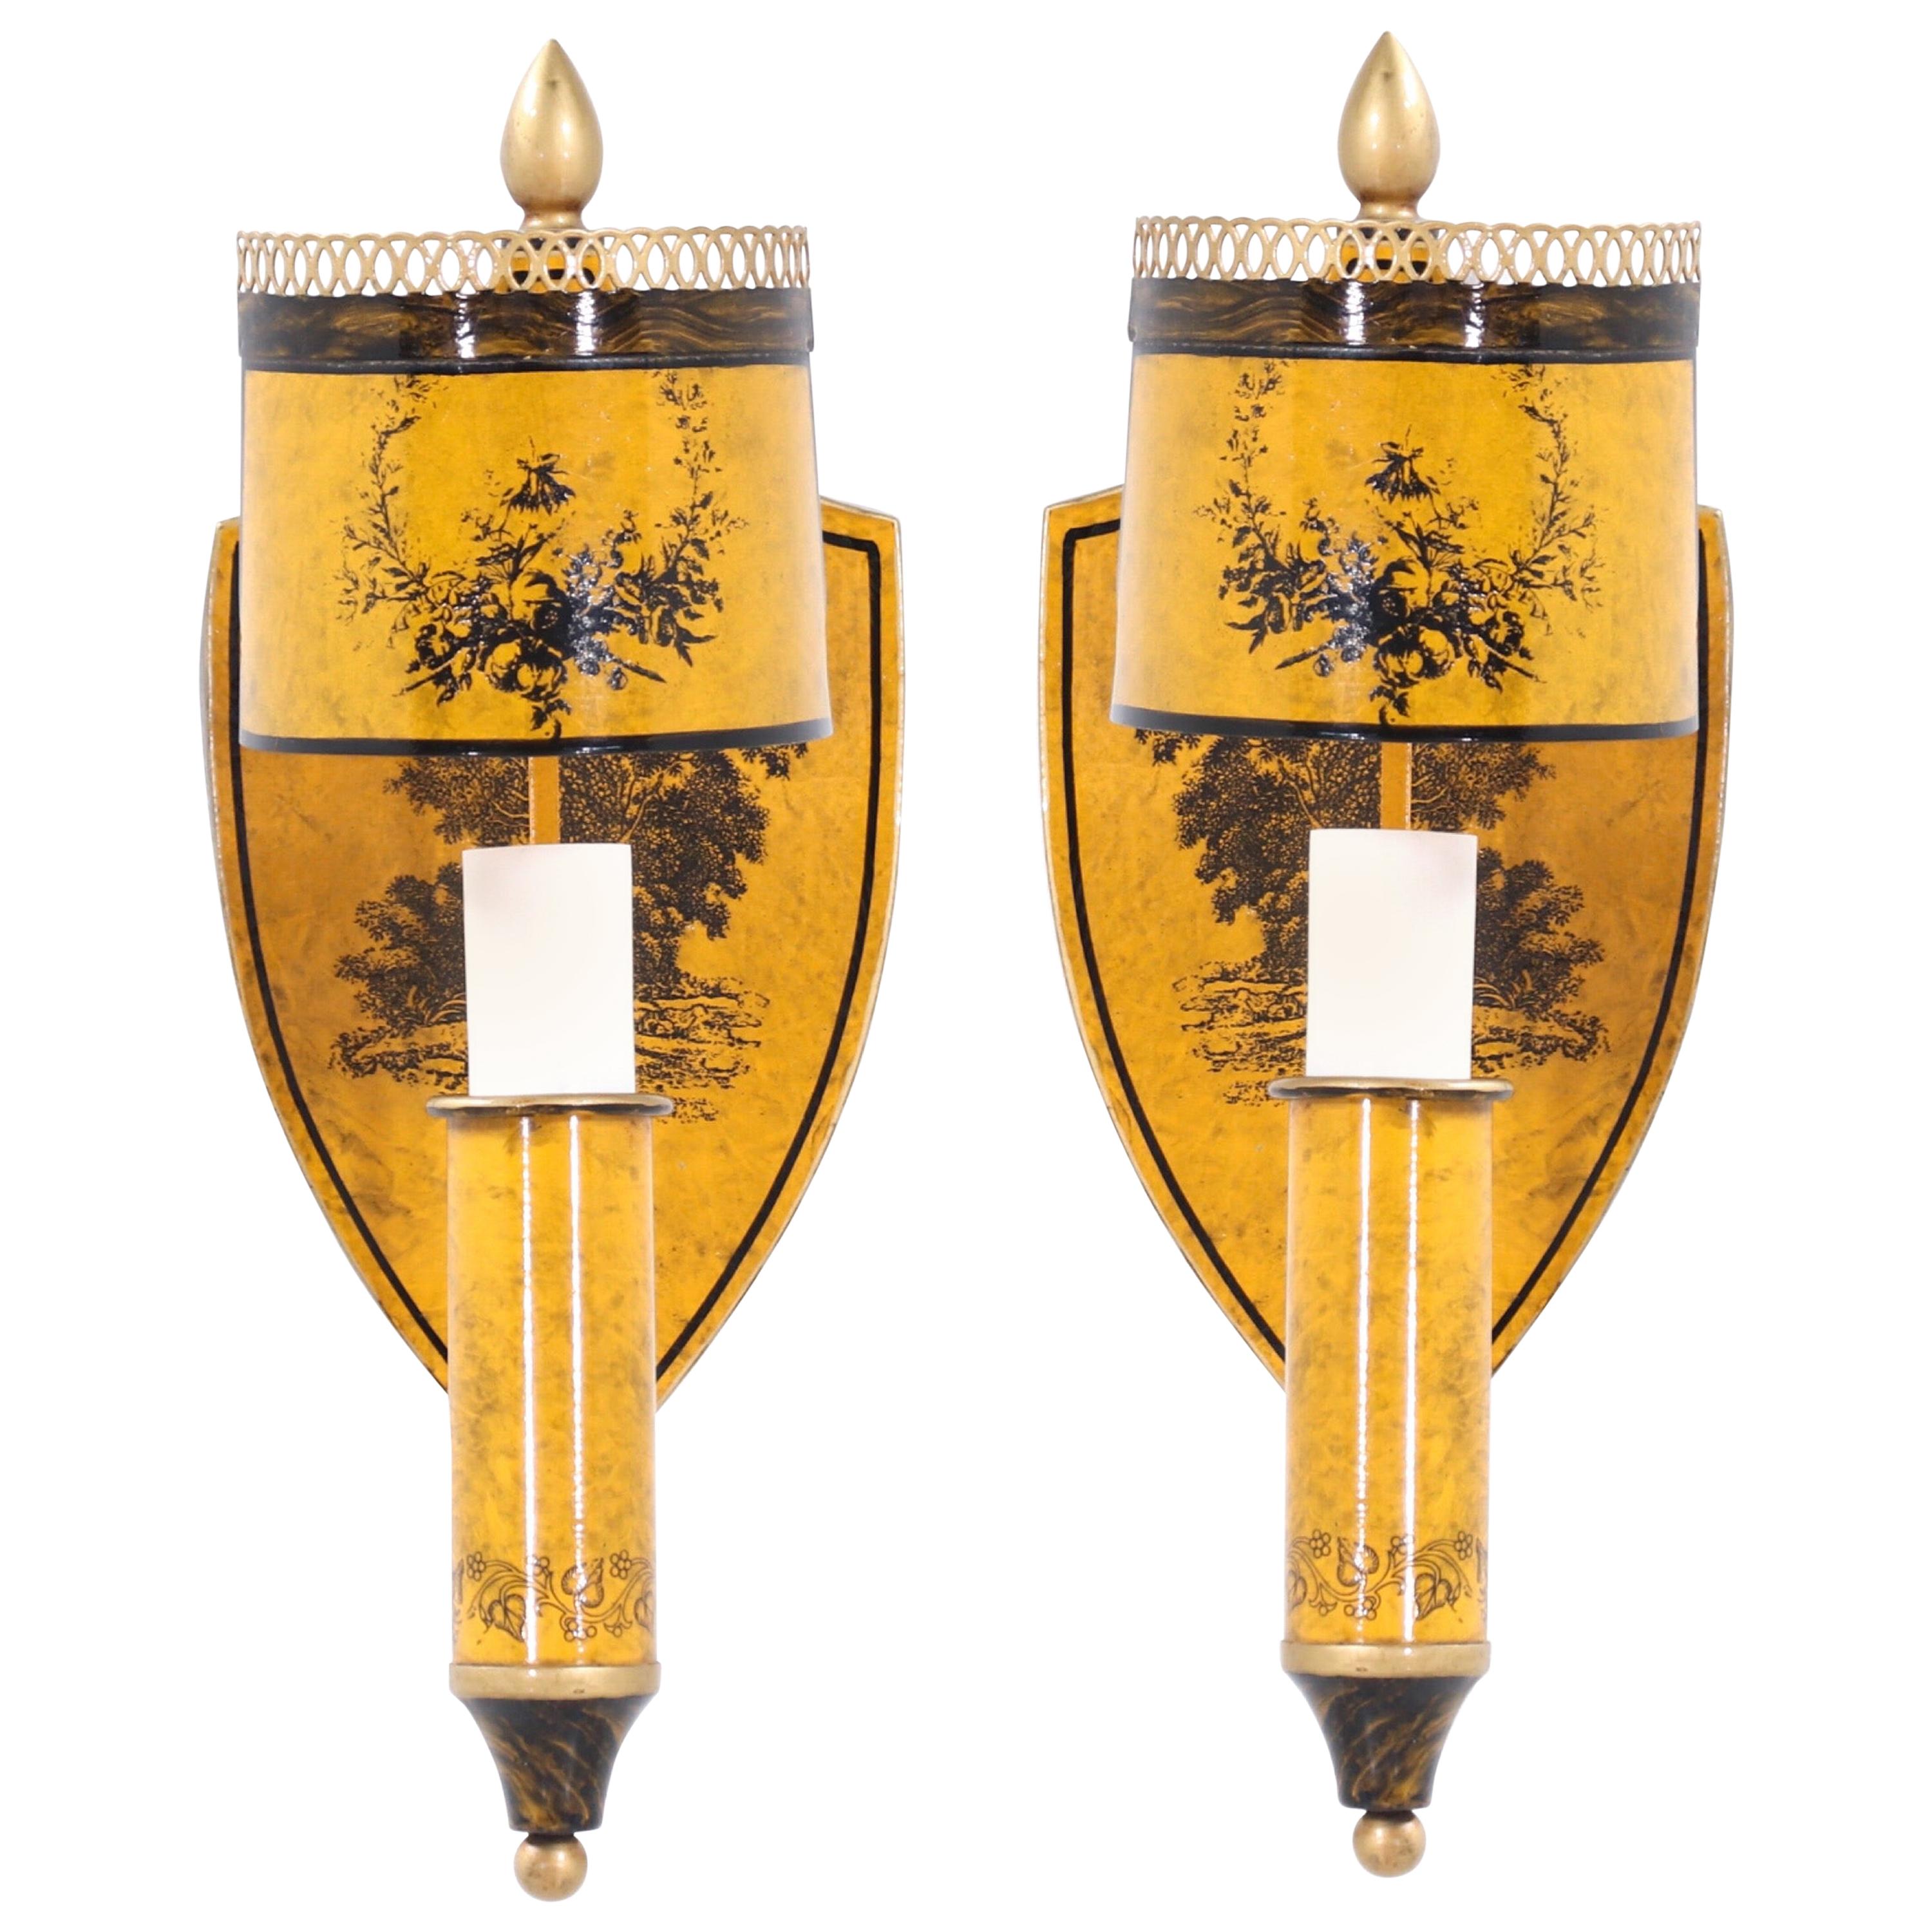 Italian Neoclassical Tole Painted Sconces